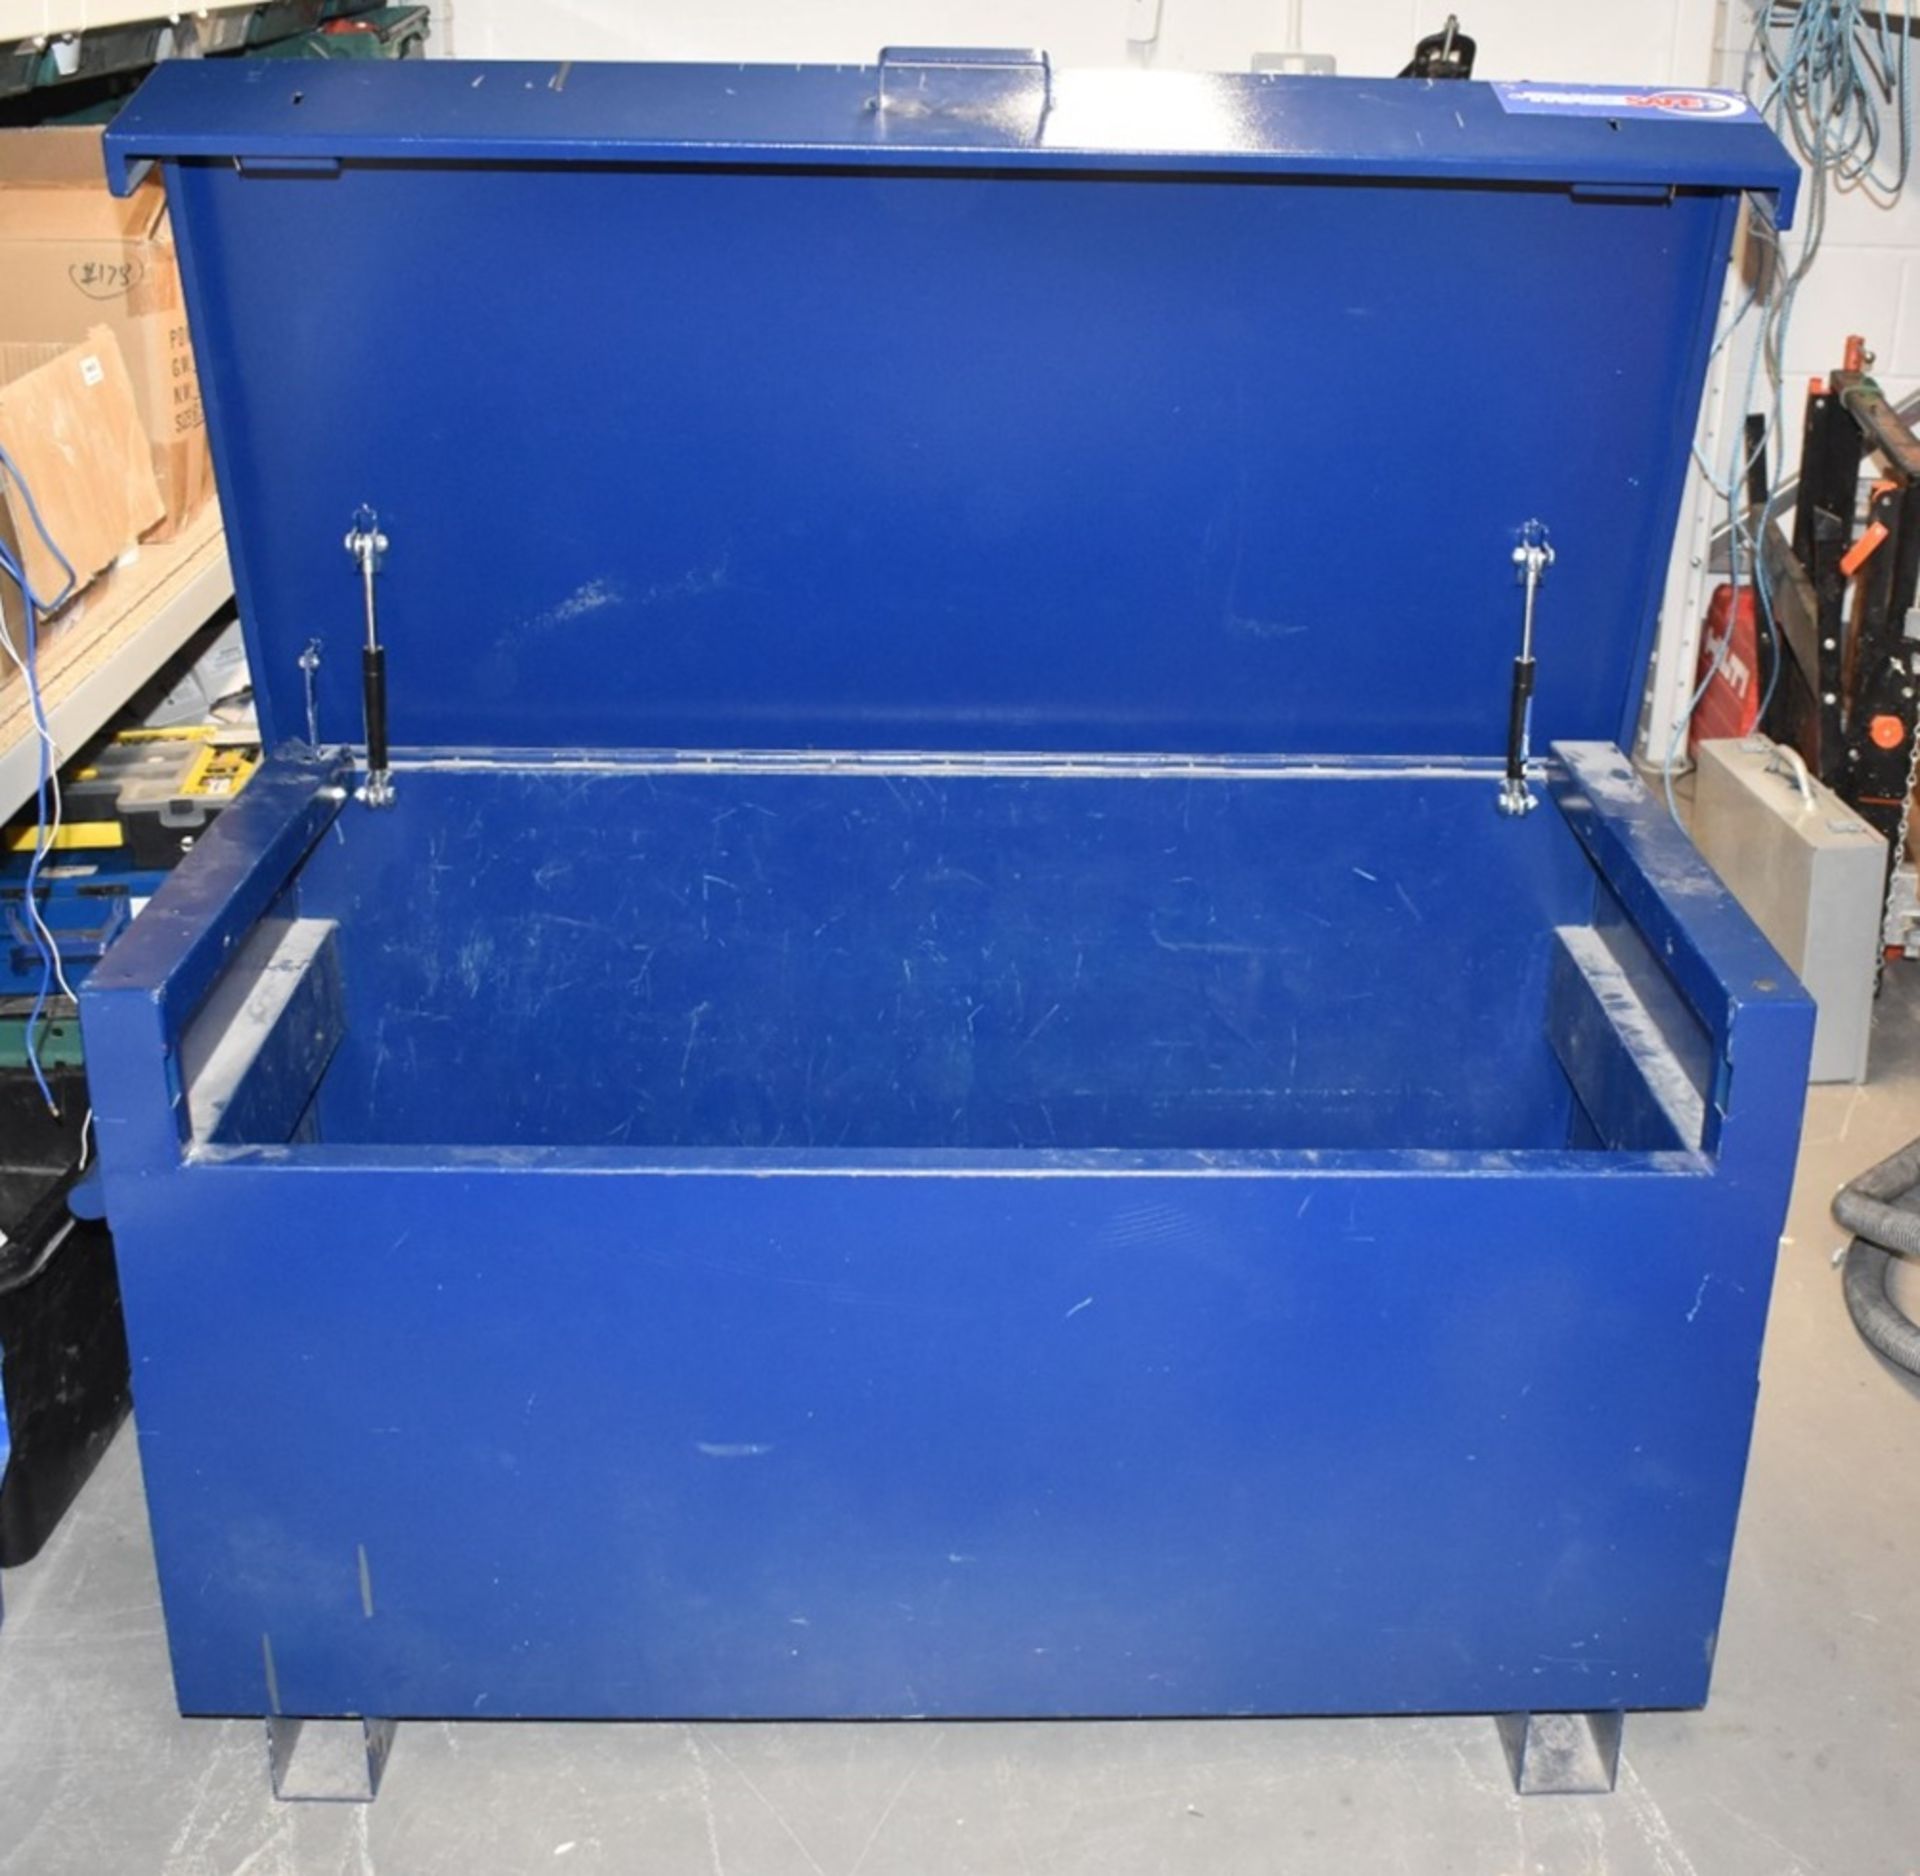 1 x Site Safe Tool Storage Chest - Ideal For Use on Worksites and Vans To Help Protect Your - Image 2 of 4